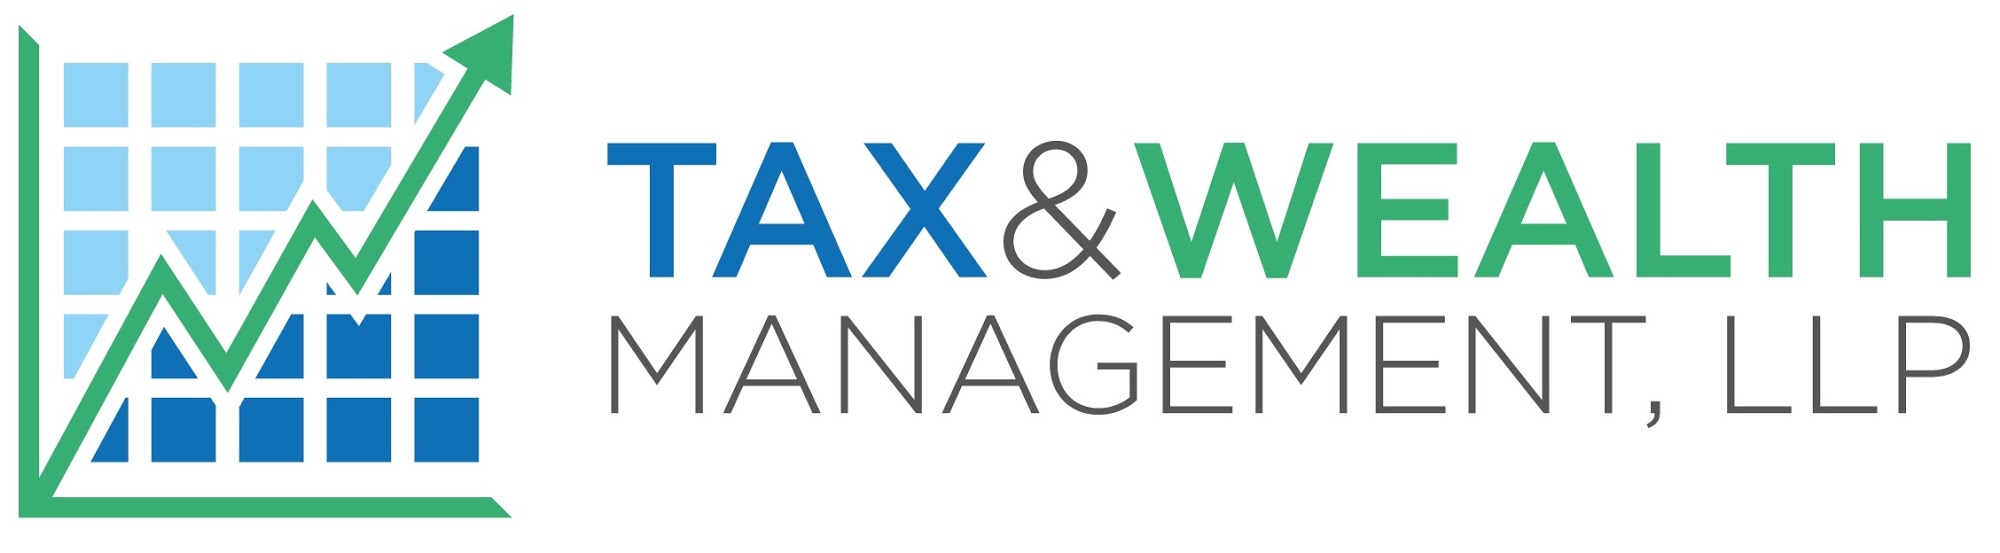 Tax & Wealth Management - Heck & Barry LLP